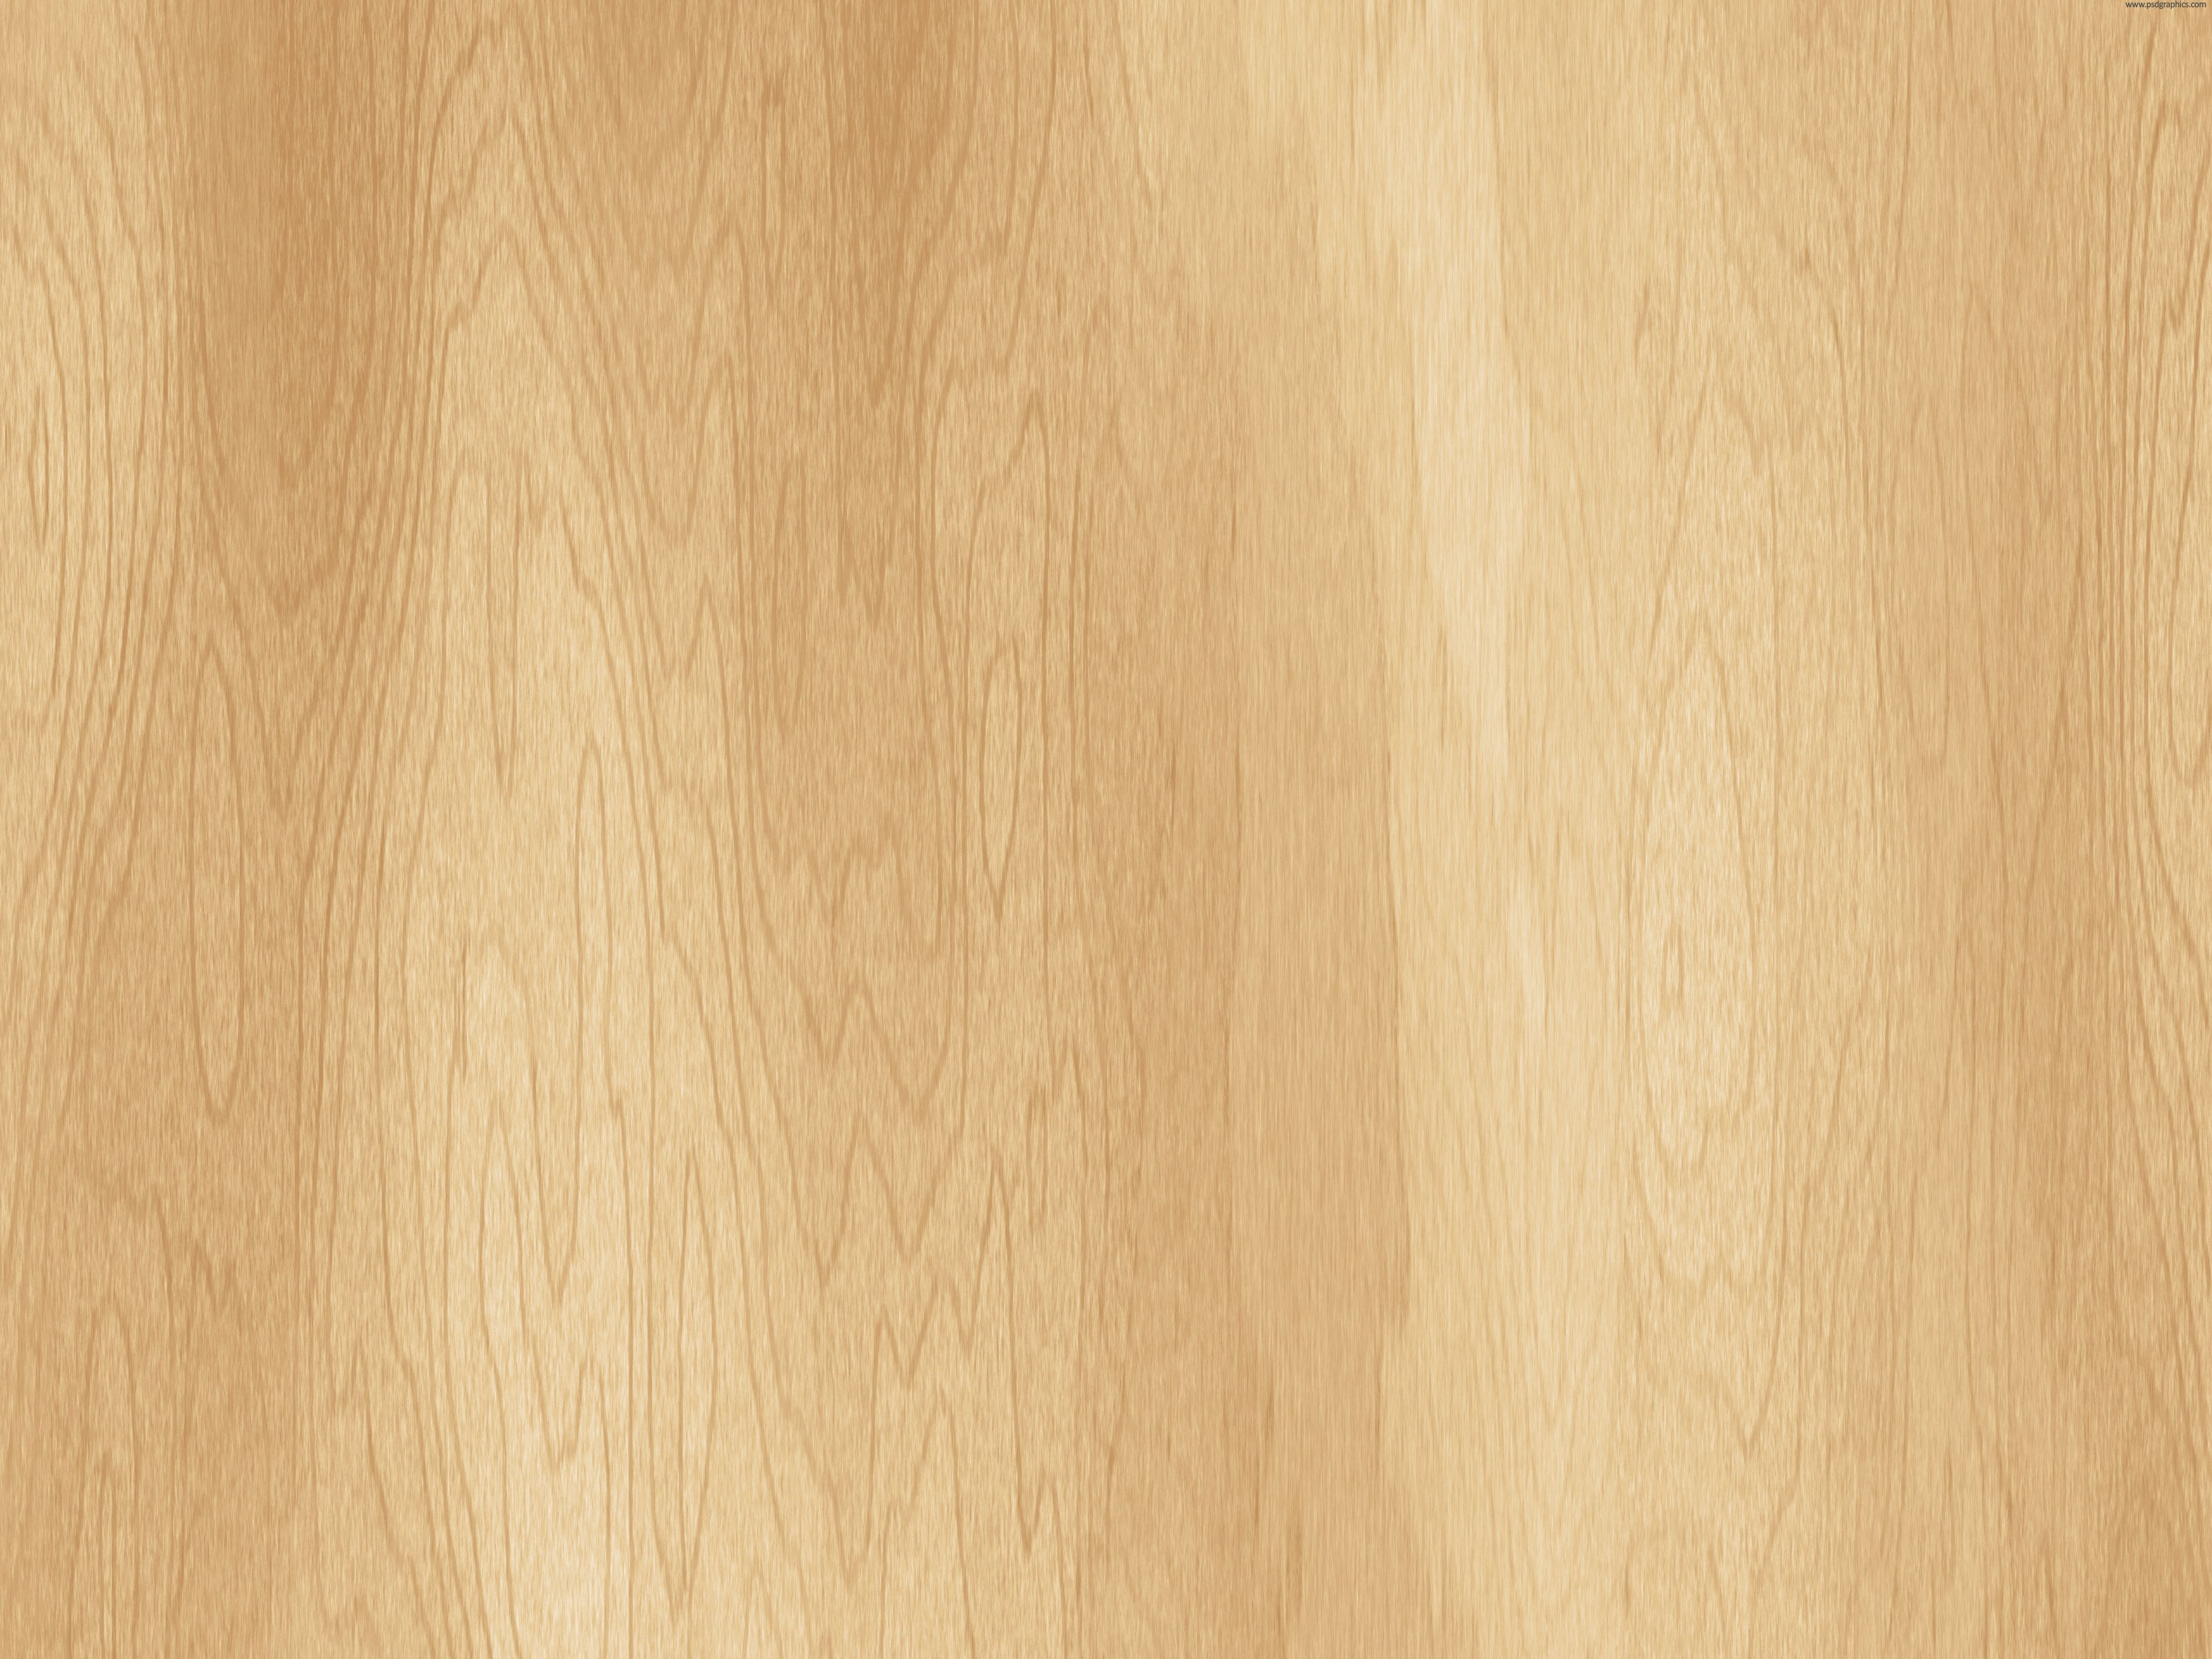 d&amp;#039;s hardwood flooring of view source image vbs pinterest wooden background wood throughout view source image